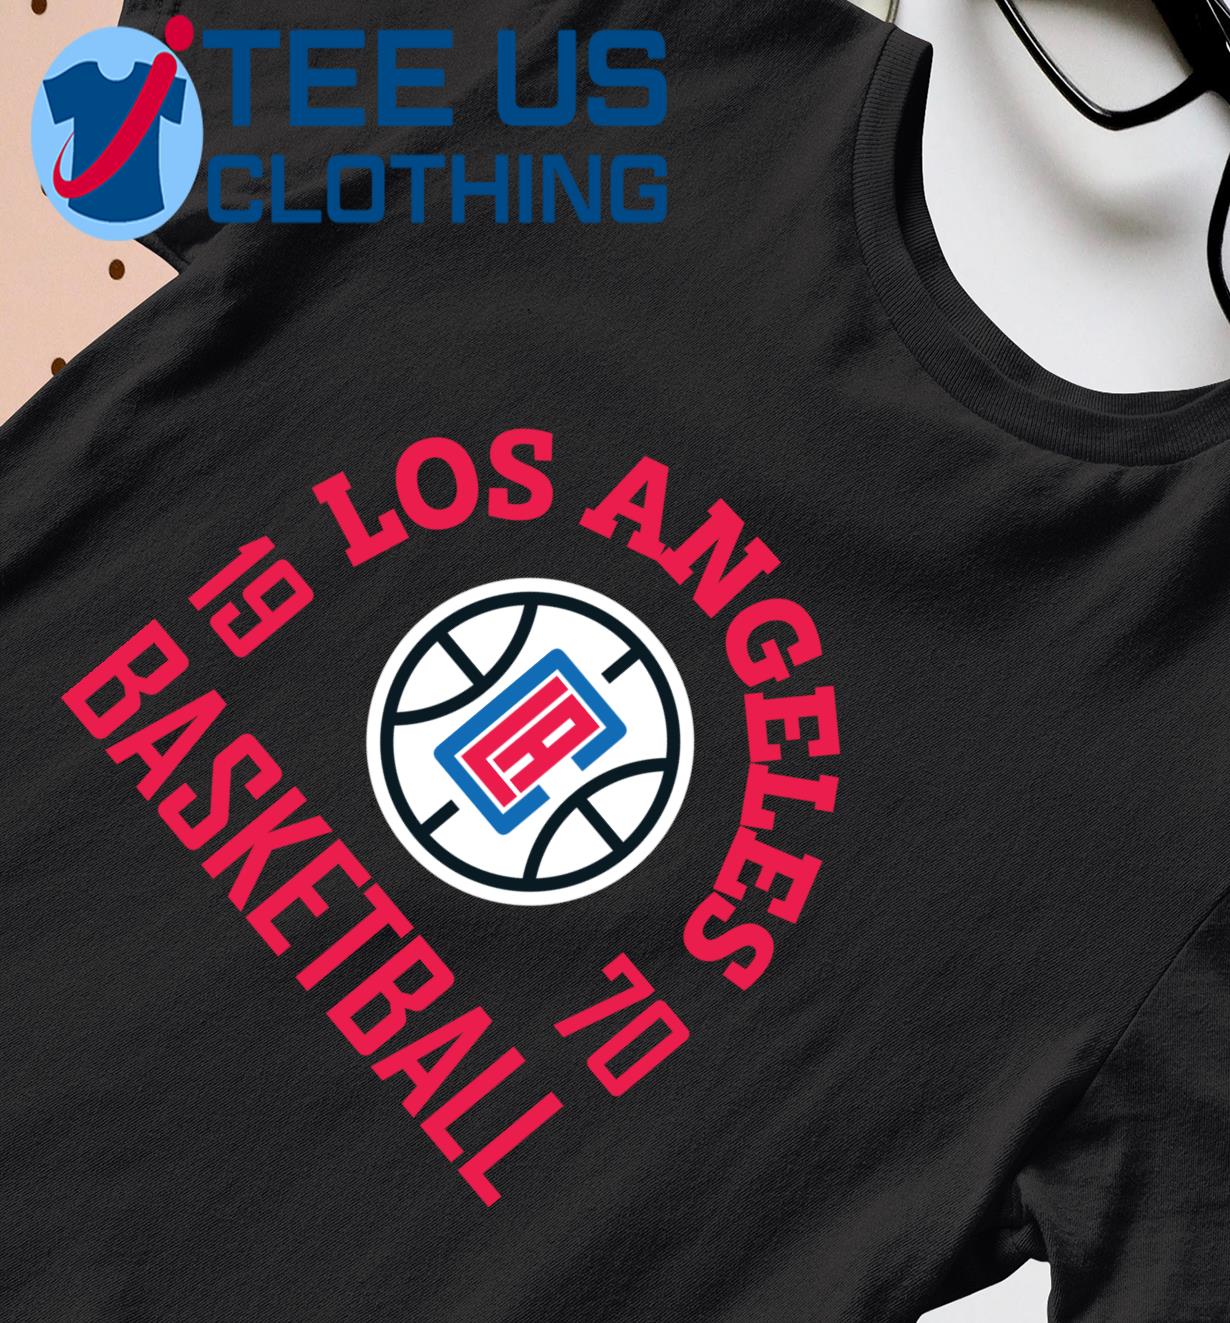 Los Angeles Clippers Basketball 1970 shirt